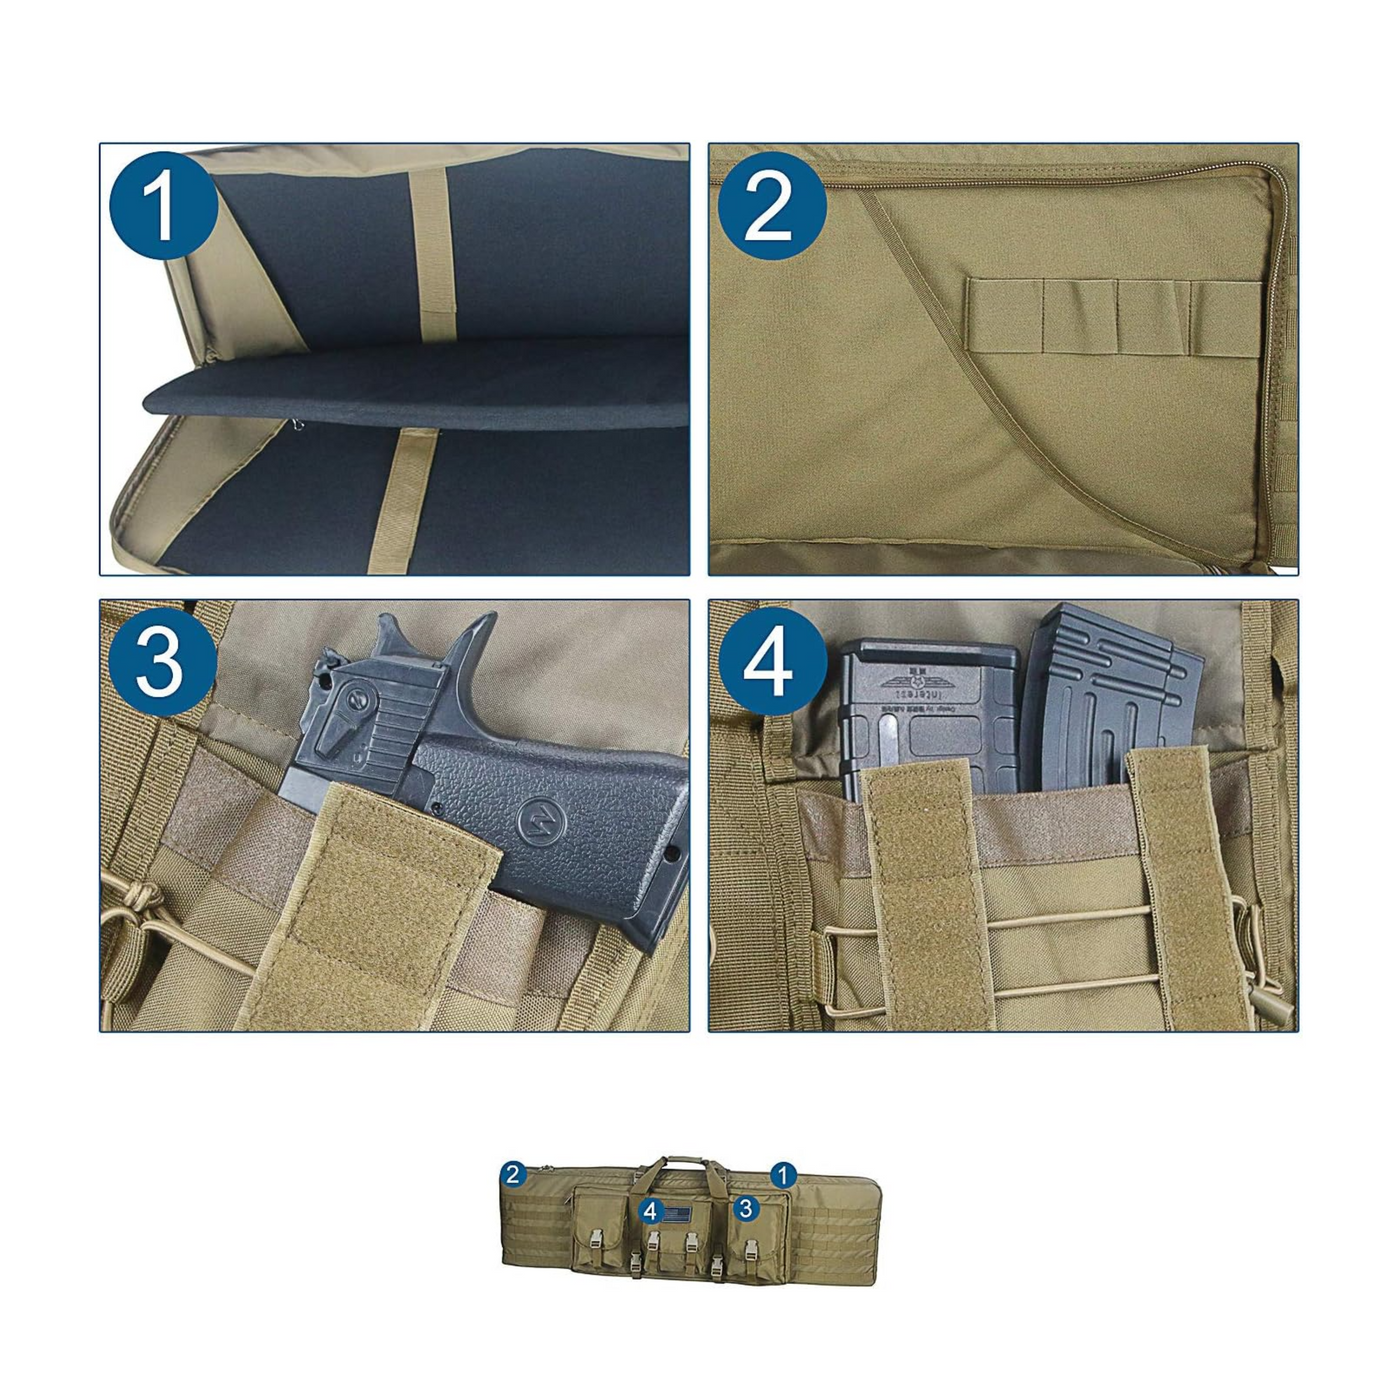 American Classic tactical gun bag with dual rifle compartments